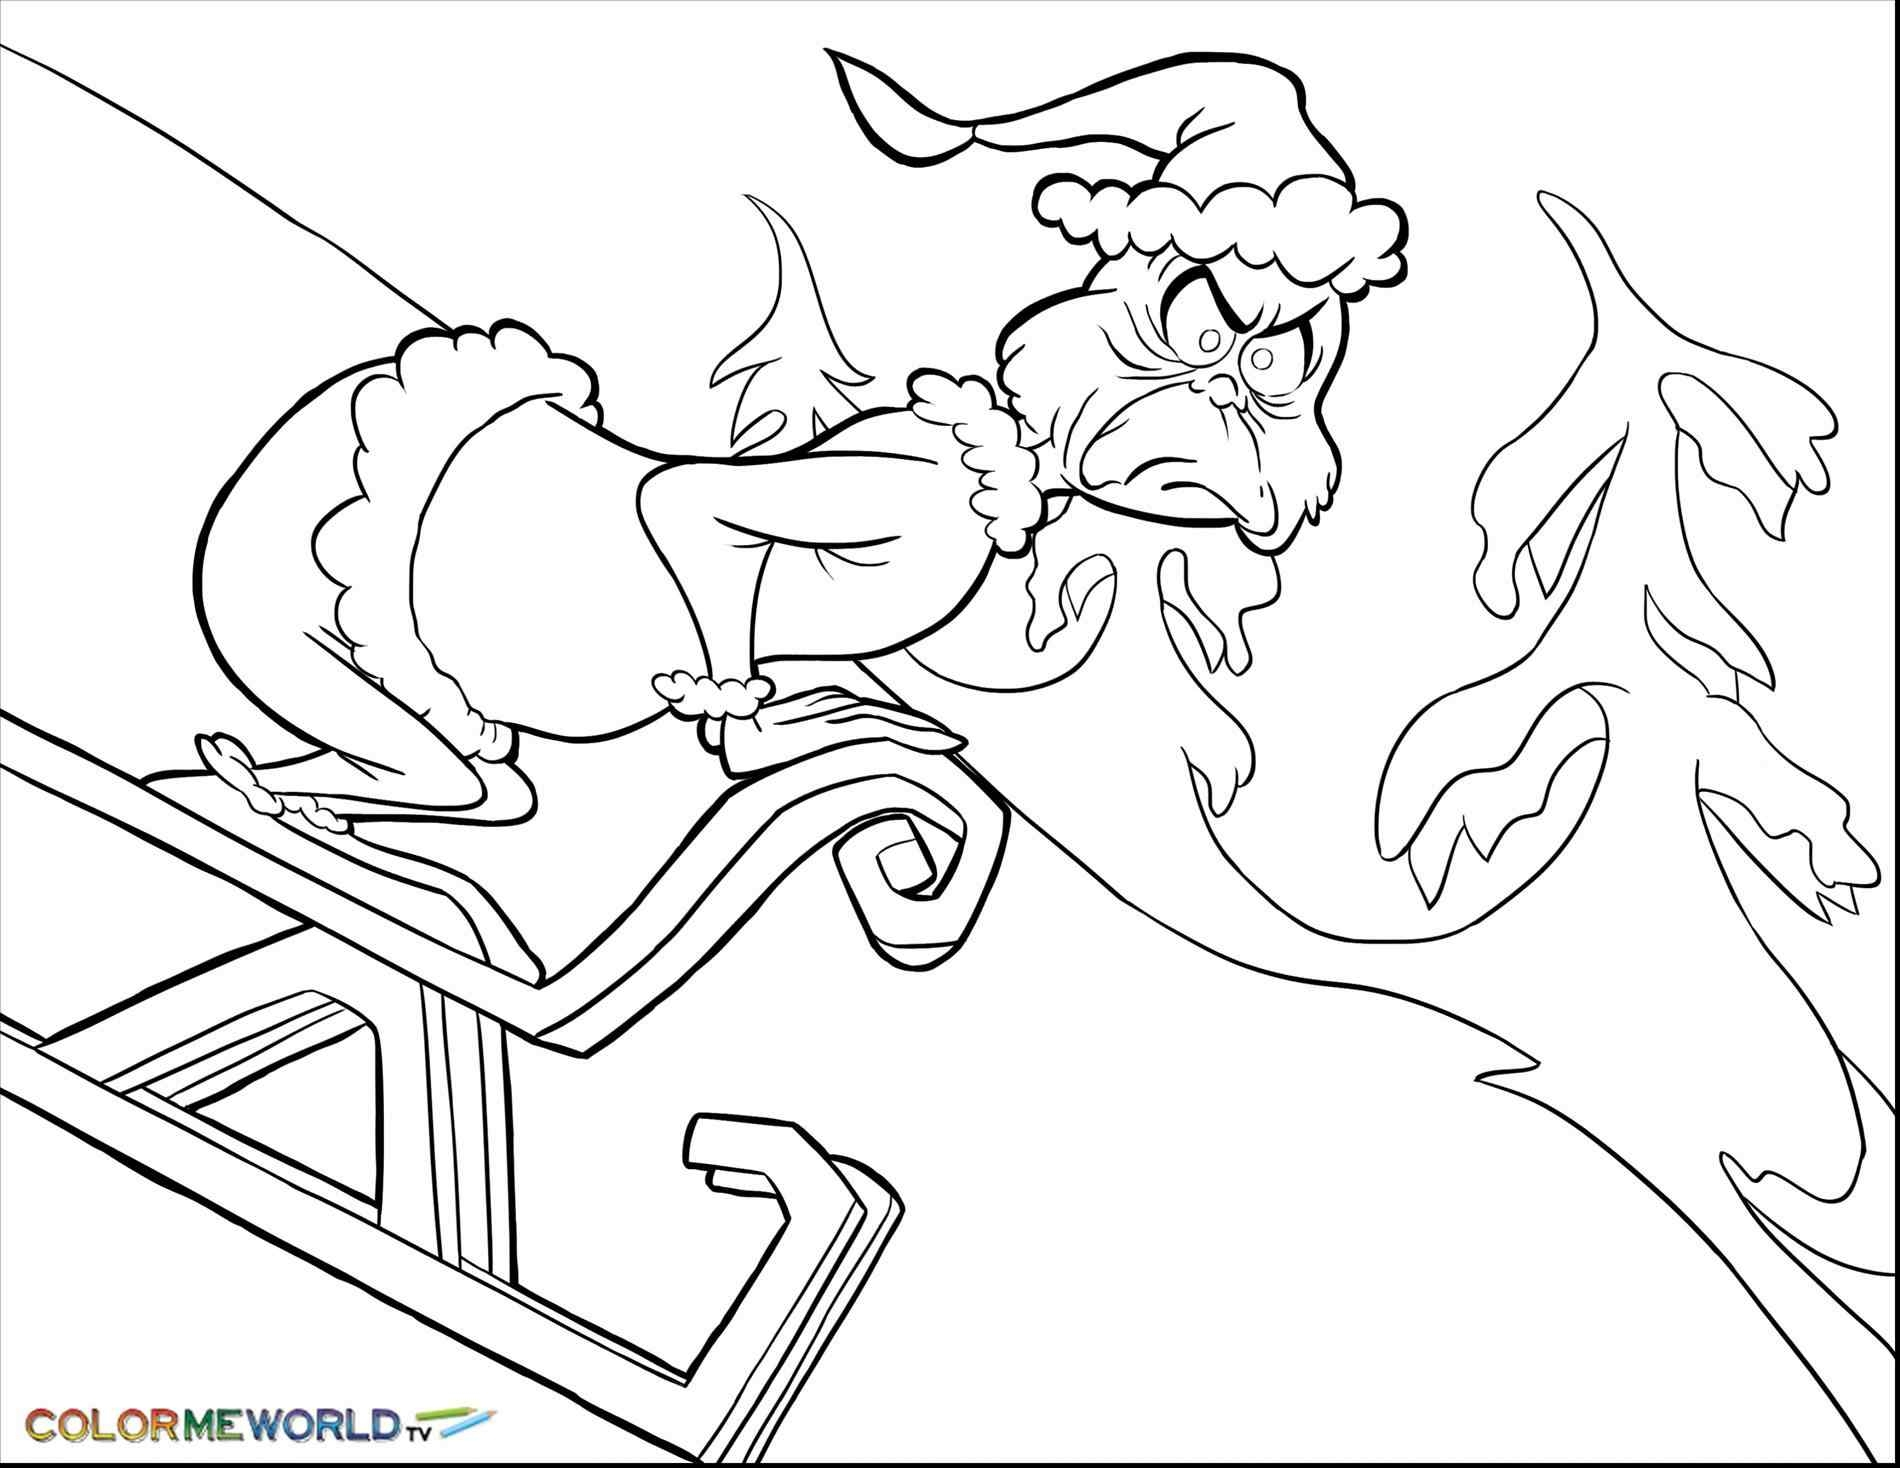 the-grinch-coloring-pages-grinch-coloring-pages-coloringrocks-birijus